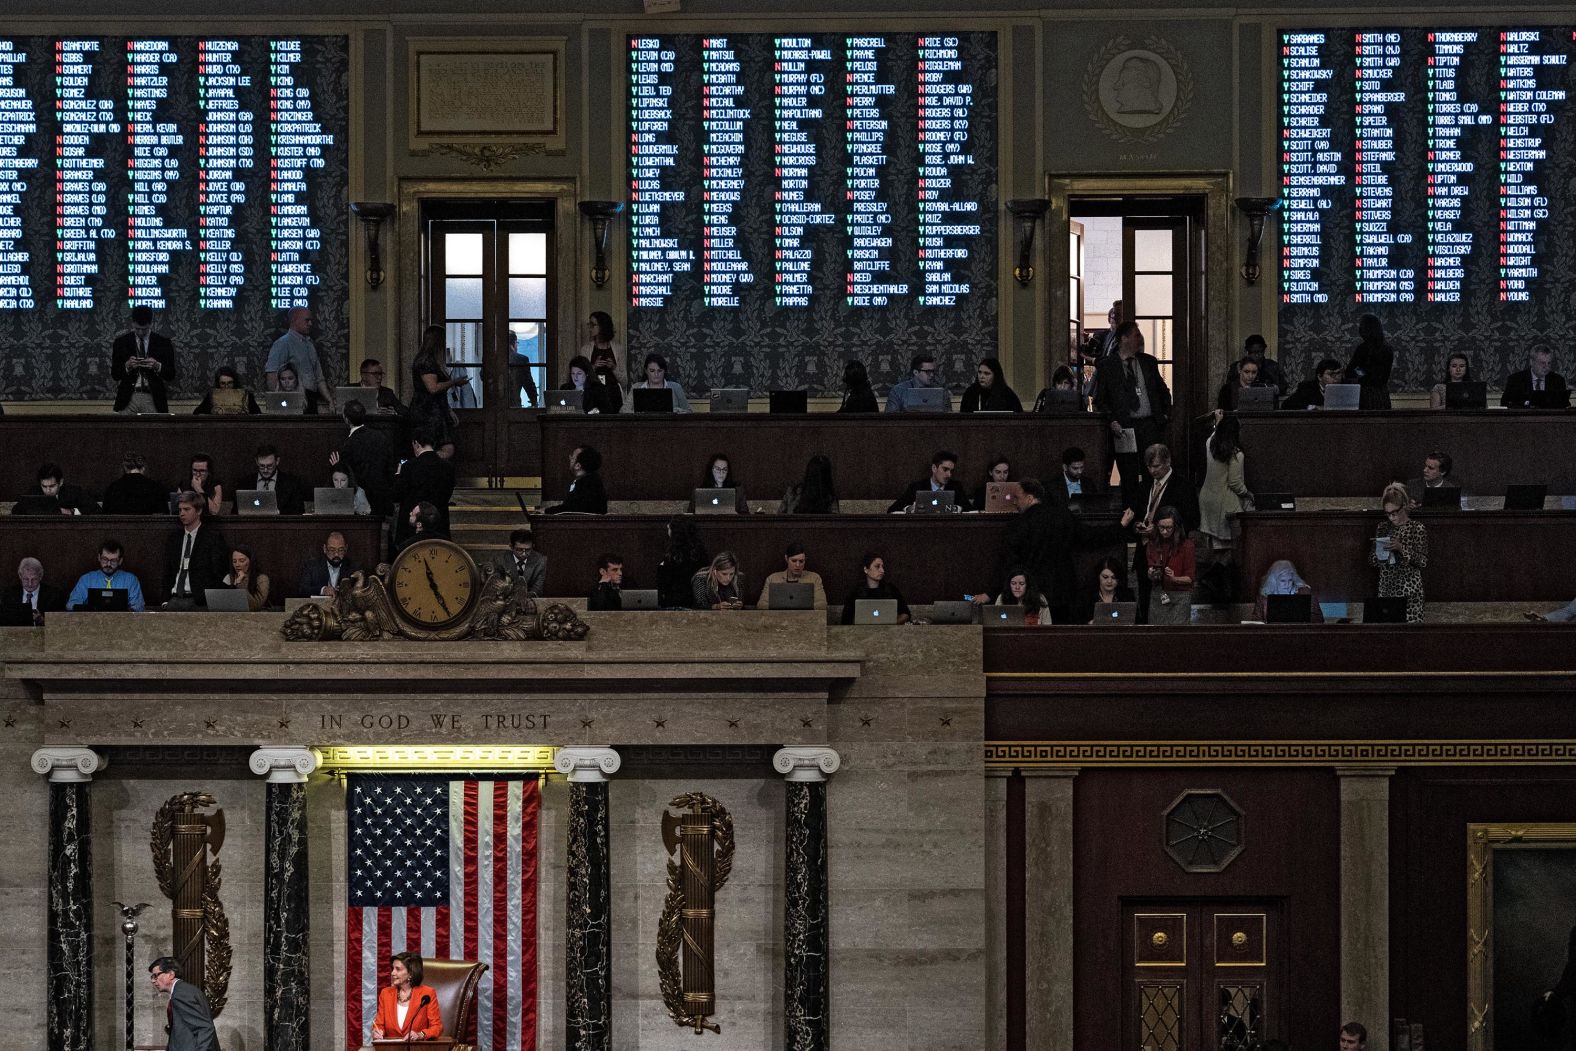 The House of Representatives <a href="https://www.cnn.com/2019/10/31/politics/house-impeachment-inquiry-resolution-floor-vote/index.html" target="_blank">approved a resolution</a> October 31 to formalize the procedures of the impeachment inquiry. The vote was 232-196 and was the first time that the full House chamber took a vote related to the inquiry. Before the vote, House Speaker Nancy Pelosi called it a "sad day" because "nobody comes to Congress to impeach a president."